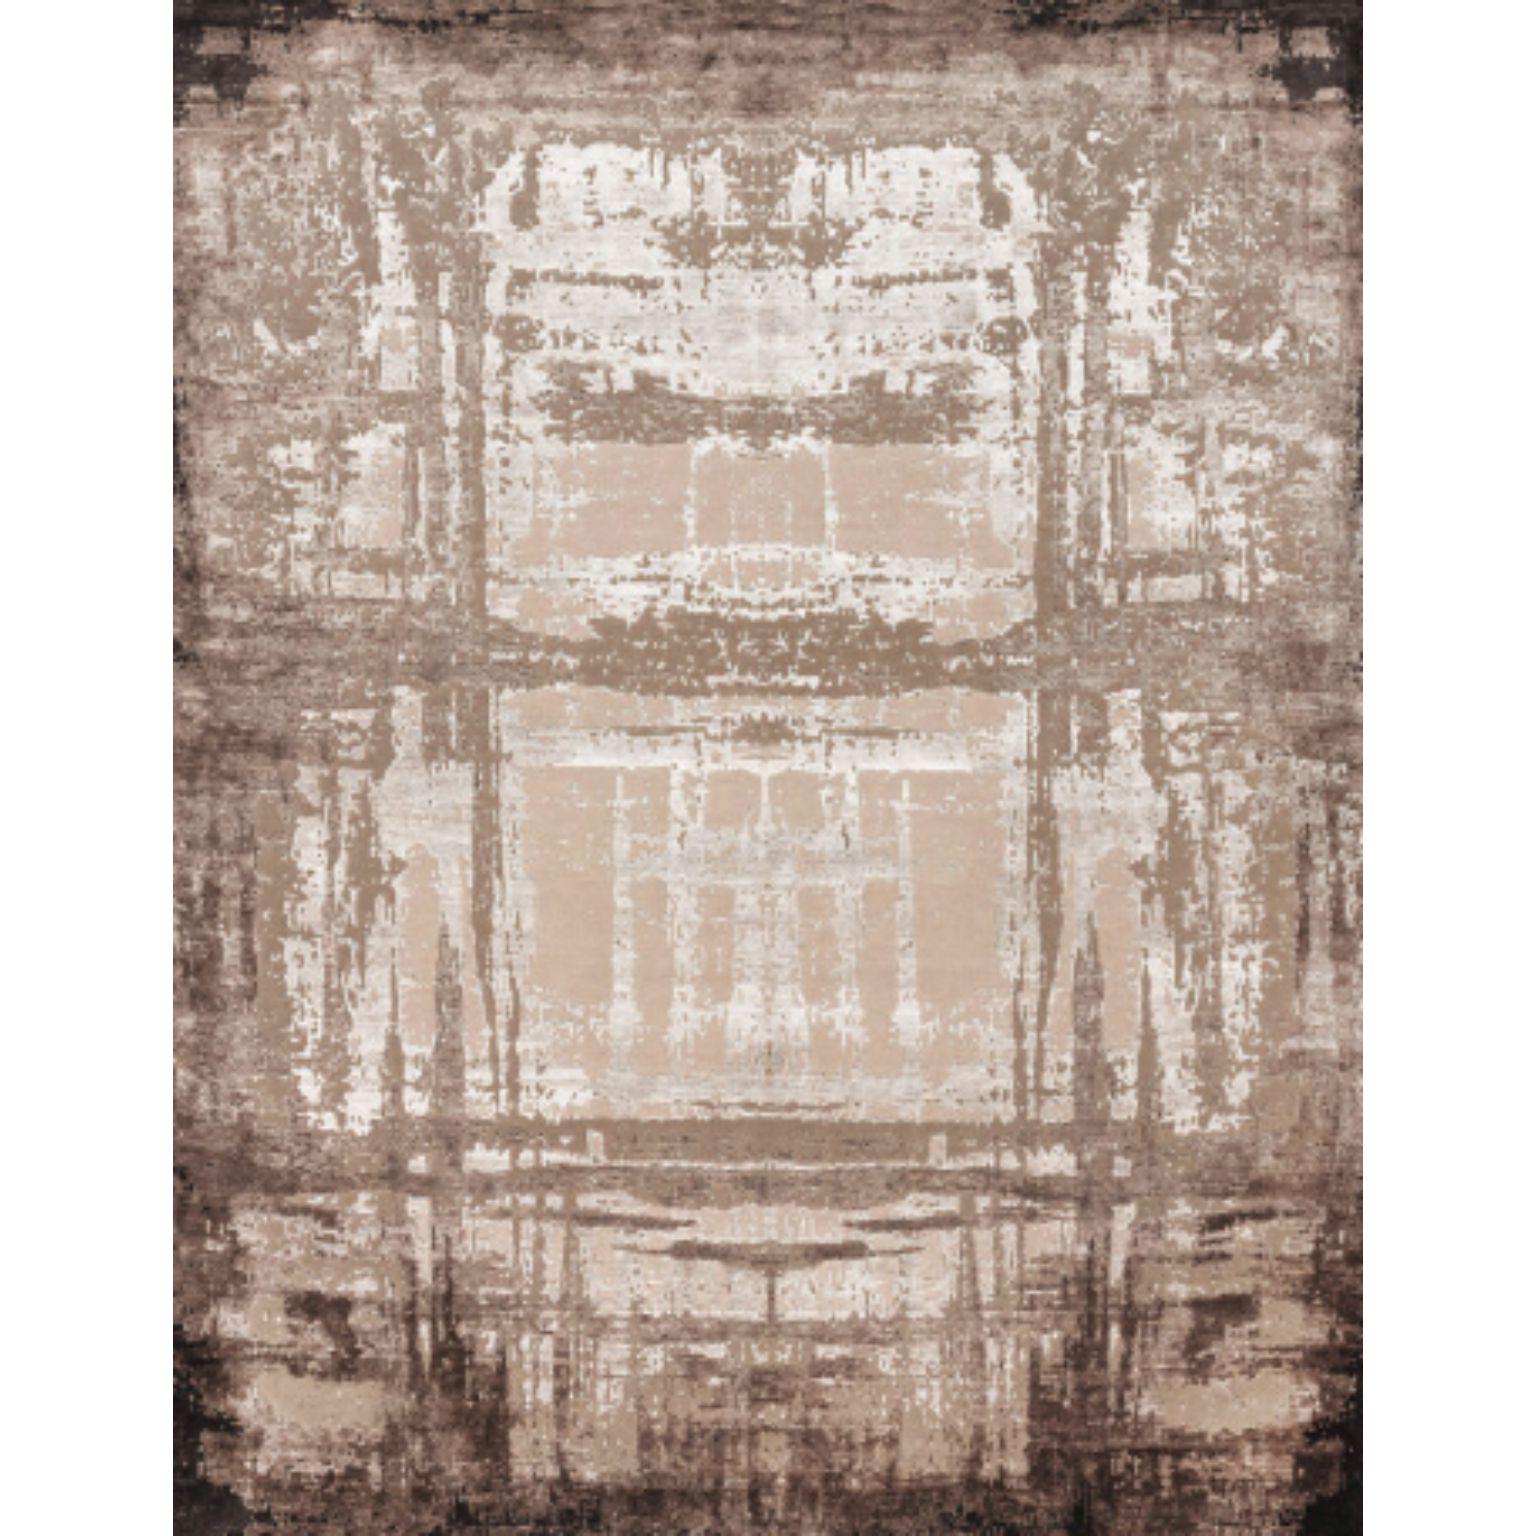 EXTREME 200 rug by Illulian
Dimensions: D300 x H200 cm 
Materials: Wool 50%, Silk 50%
Variations available and prices may vary according to materials and sizes.

Illulian, historic and prestigious rug company brand, internationally renowned in